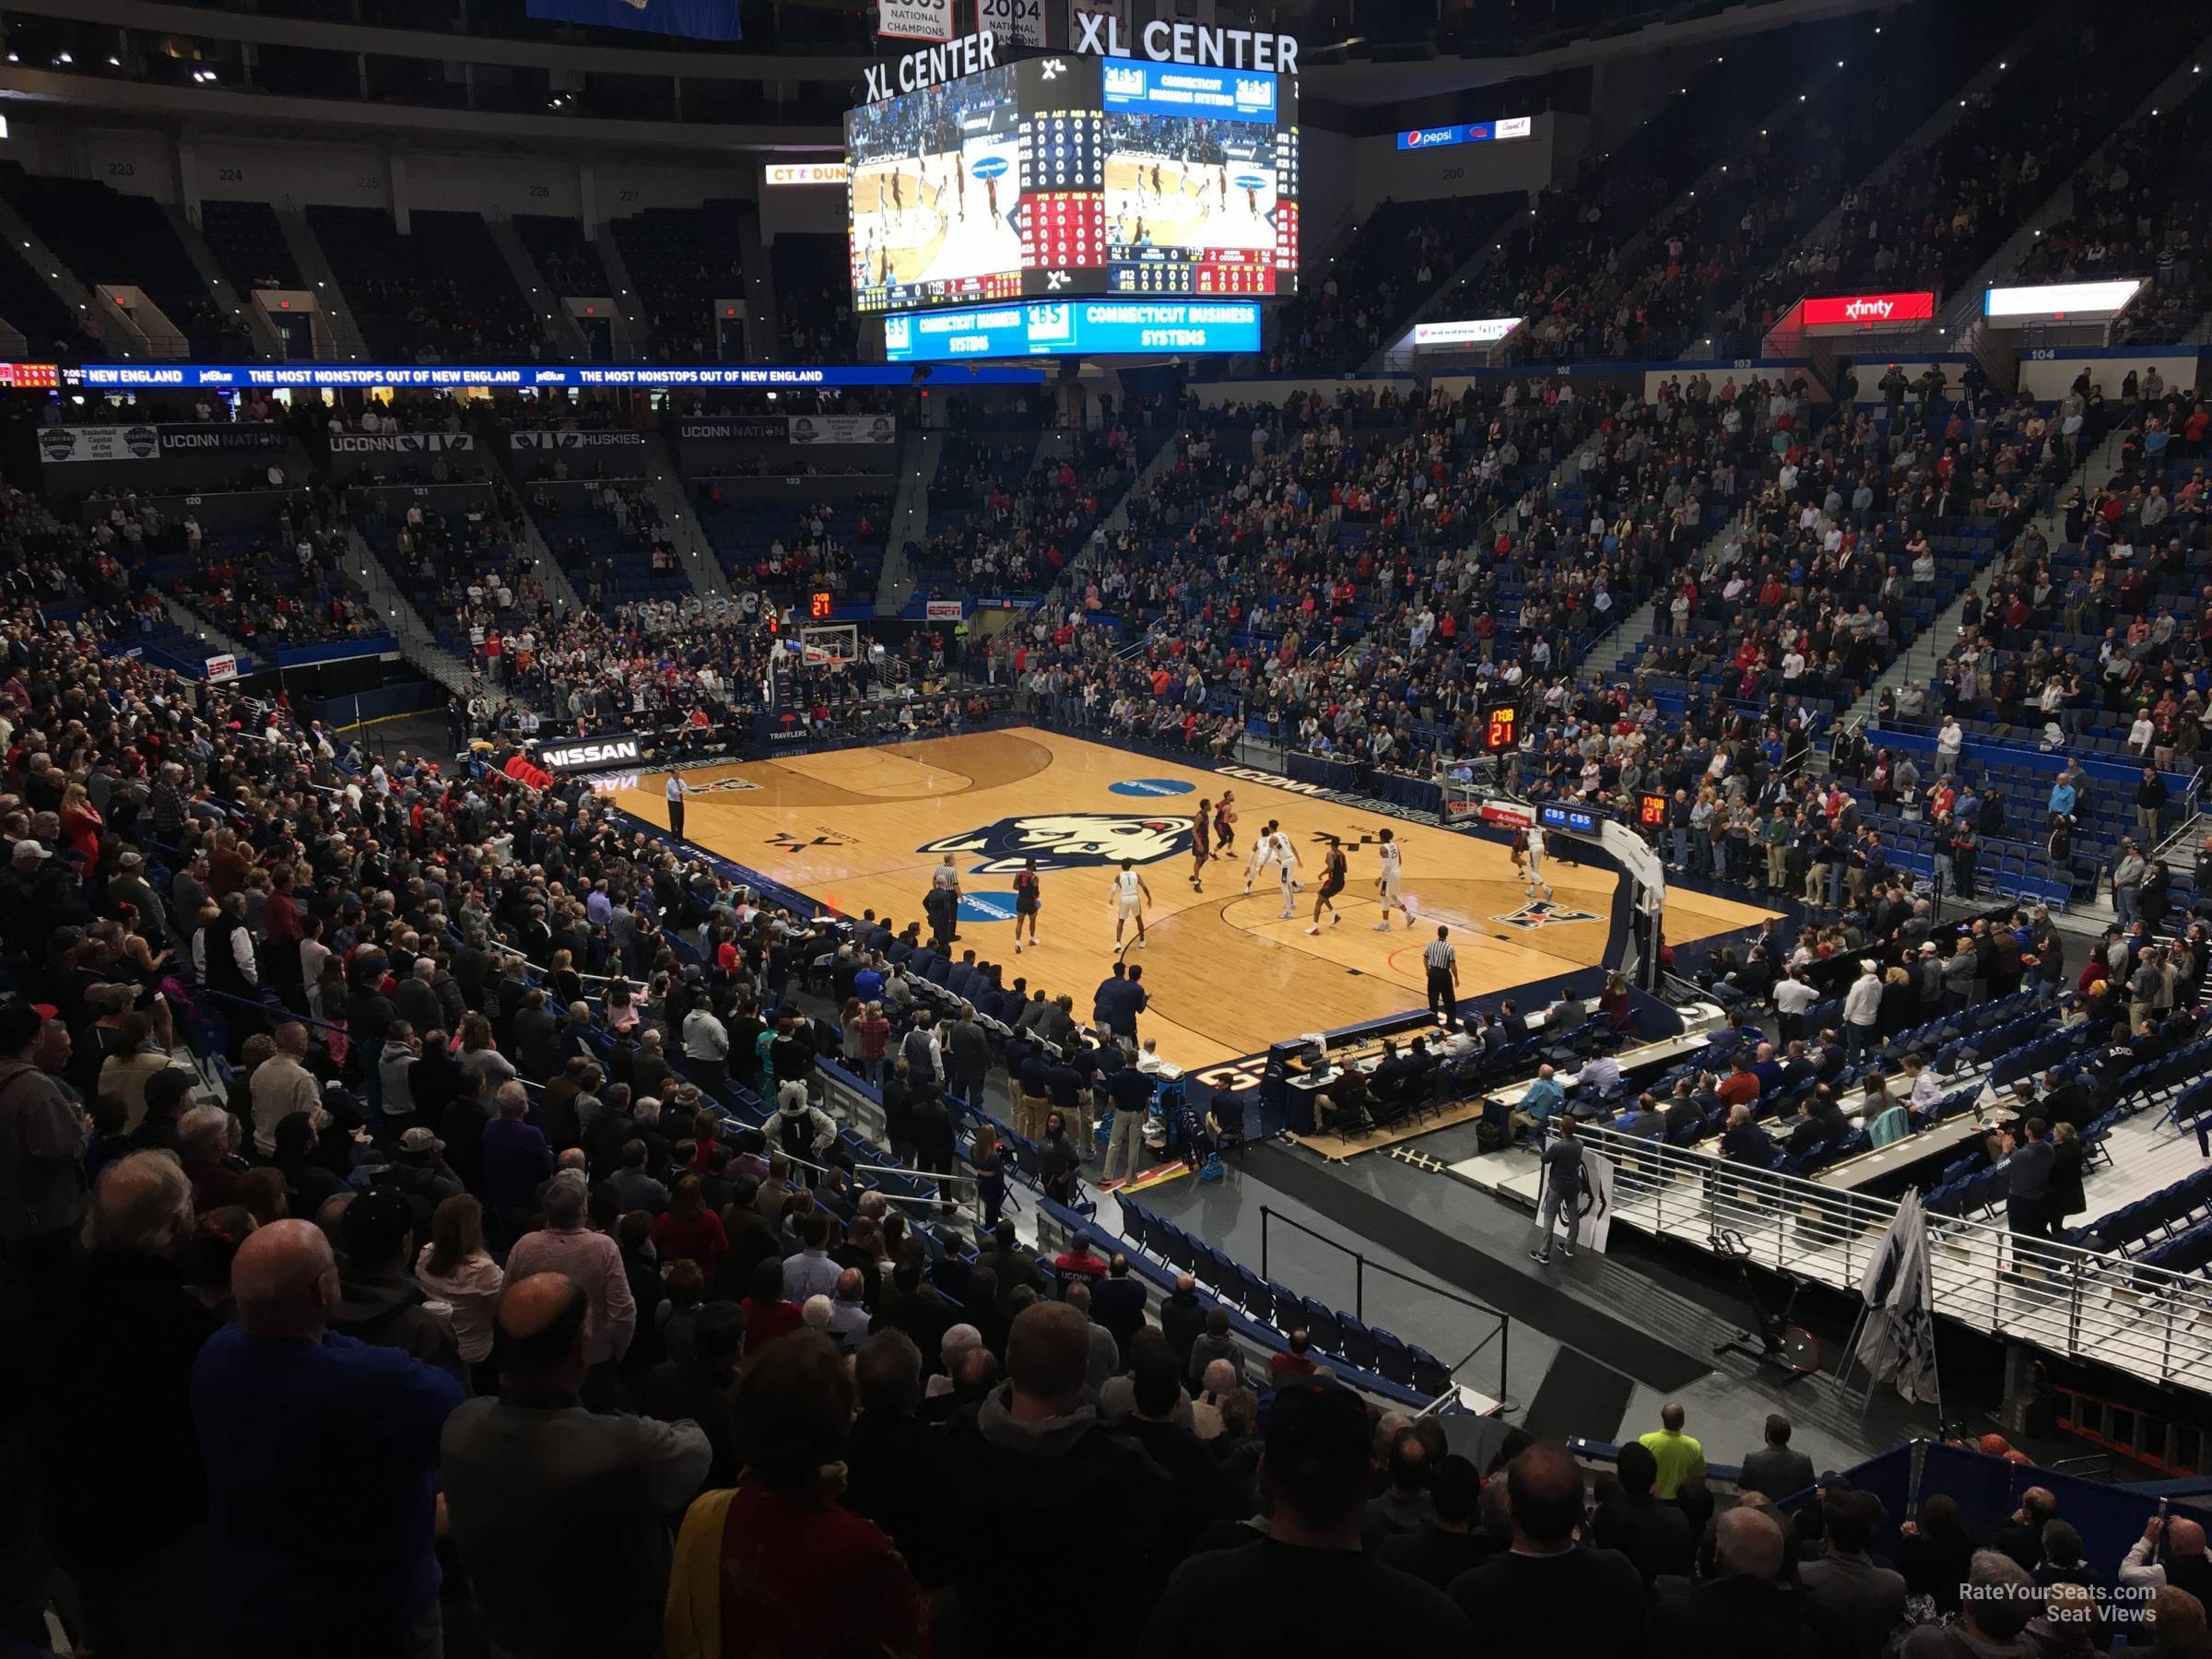 section 112, row s seat view  - xl center